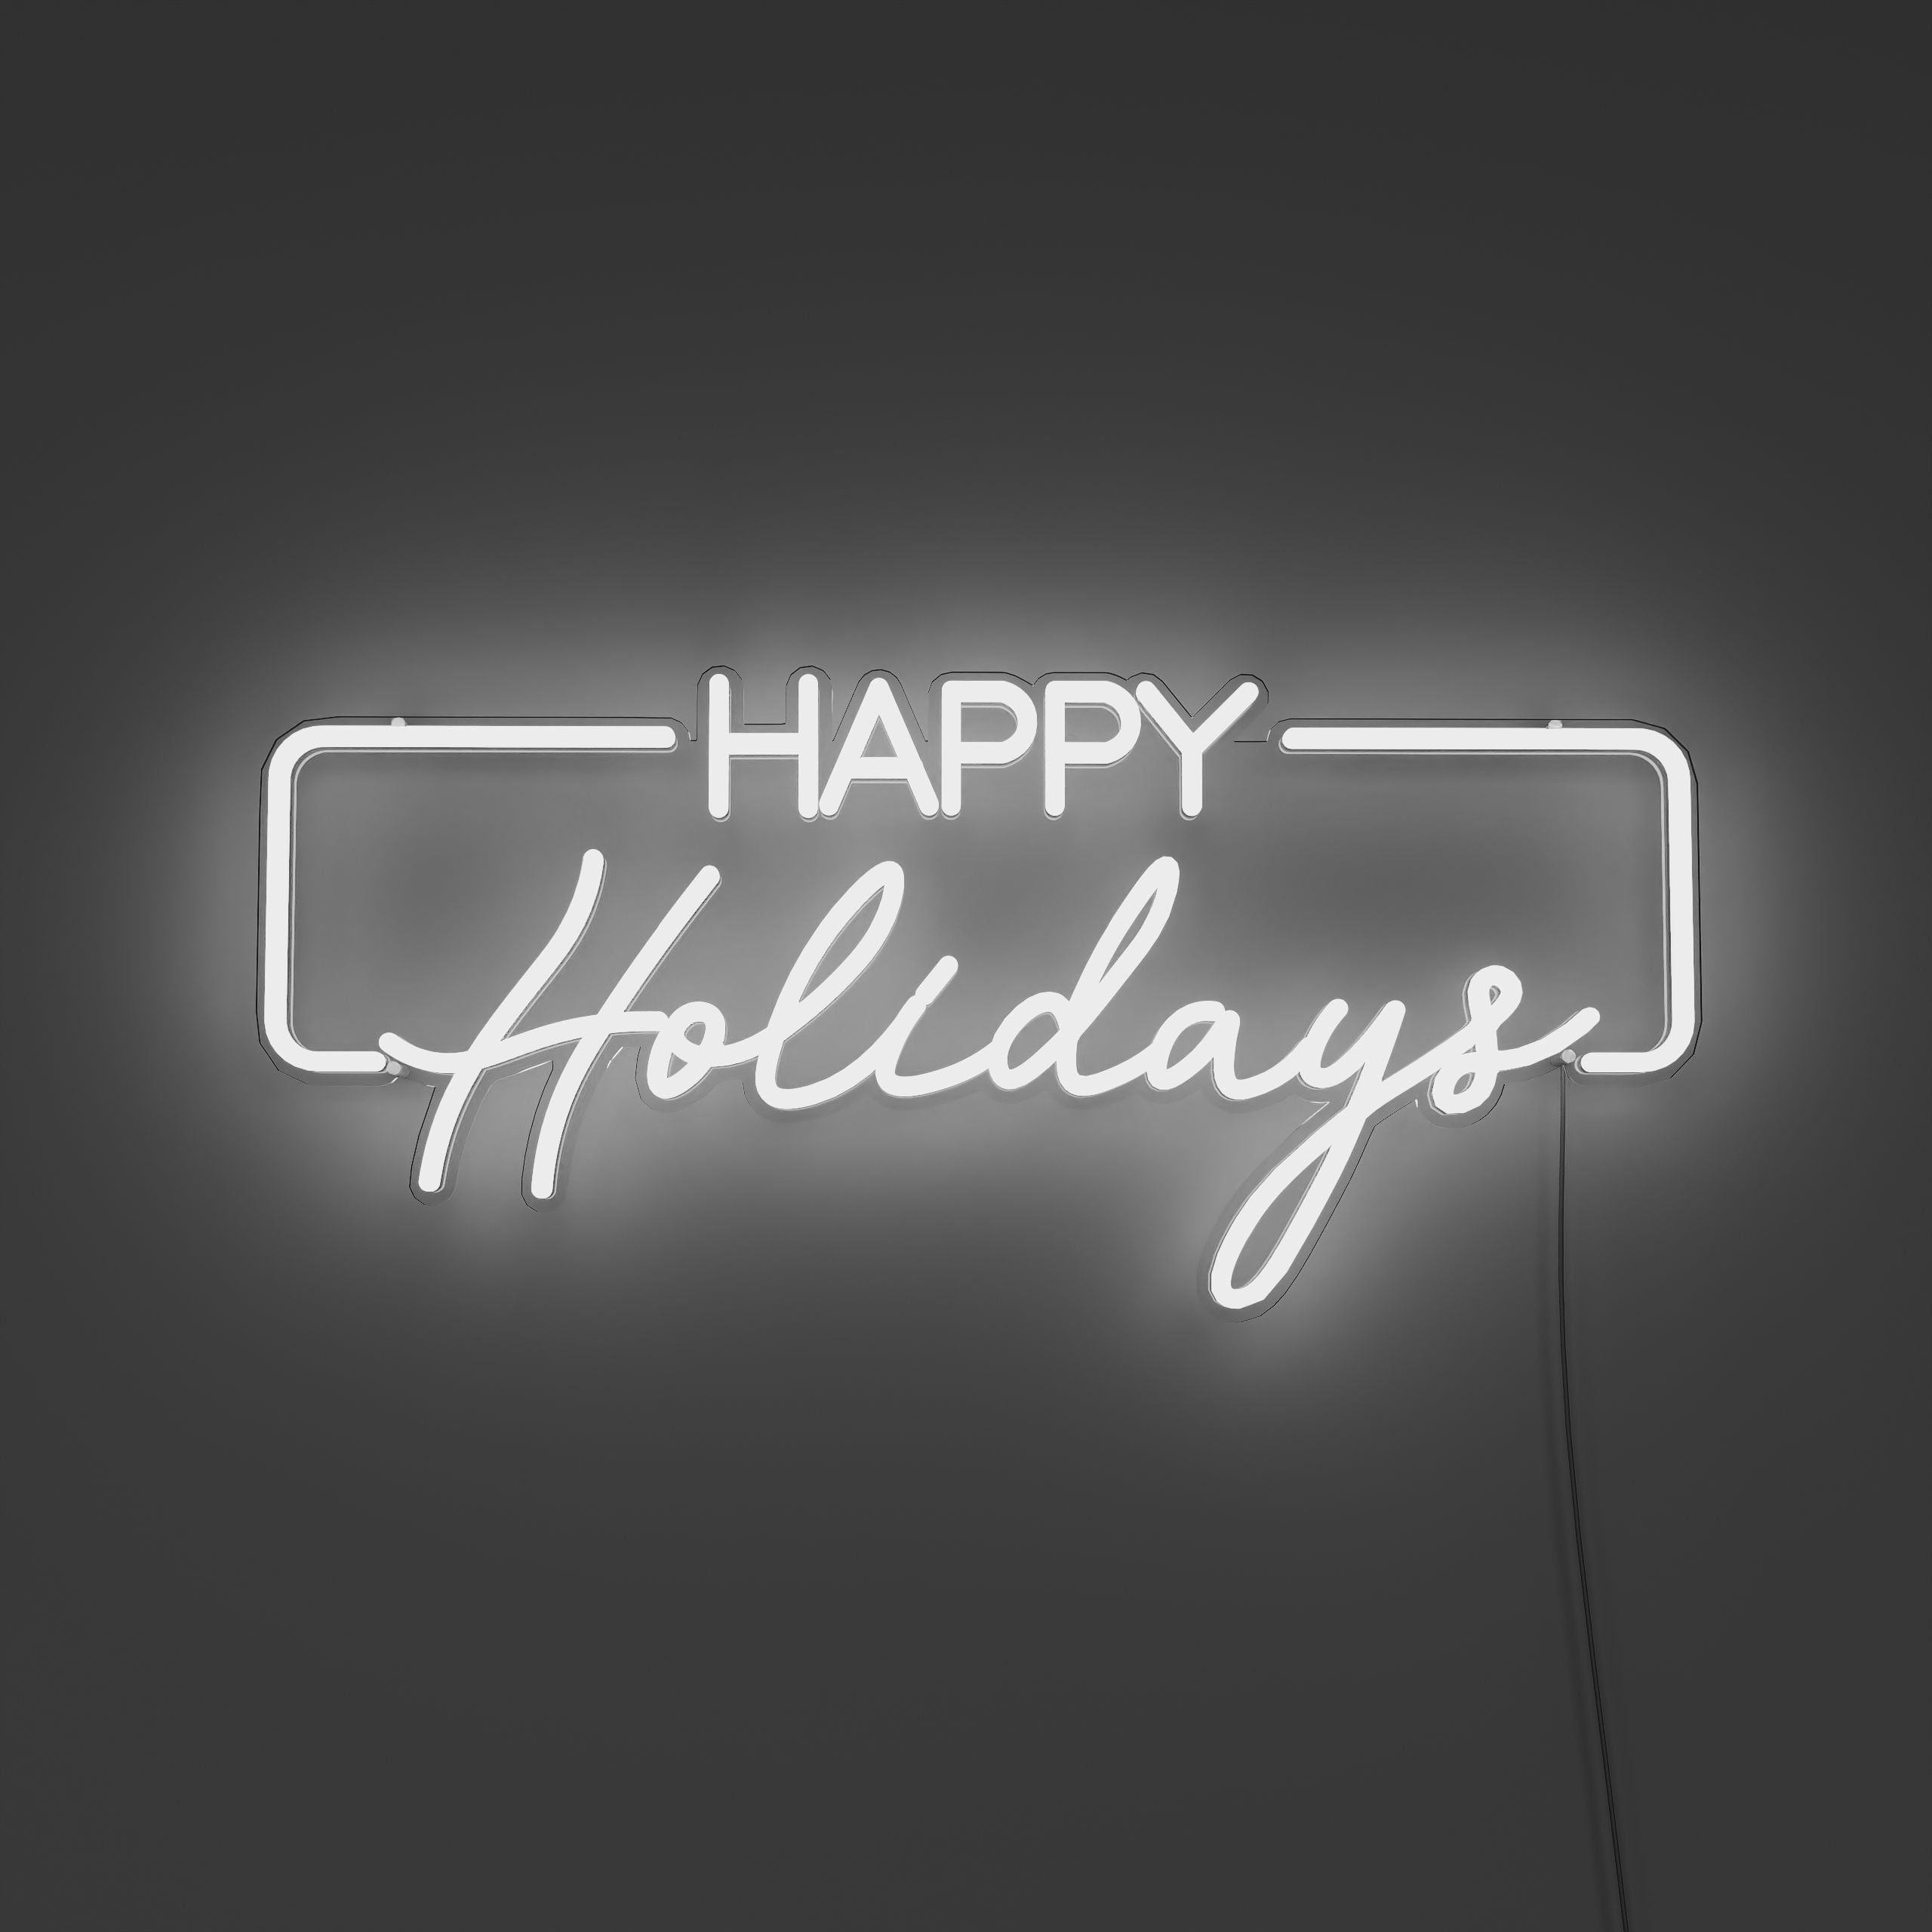 holiday-happiness-ahead-neon-sign-lite